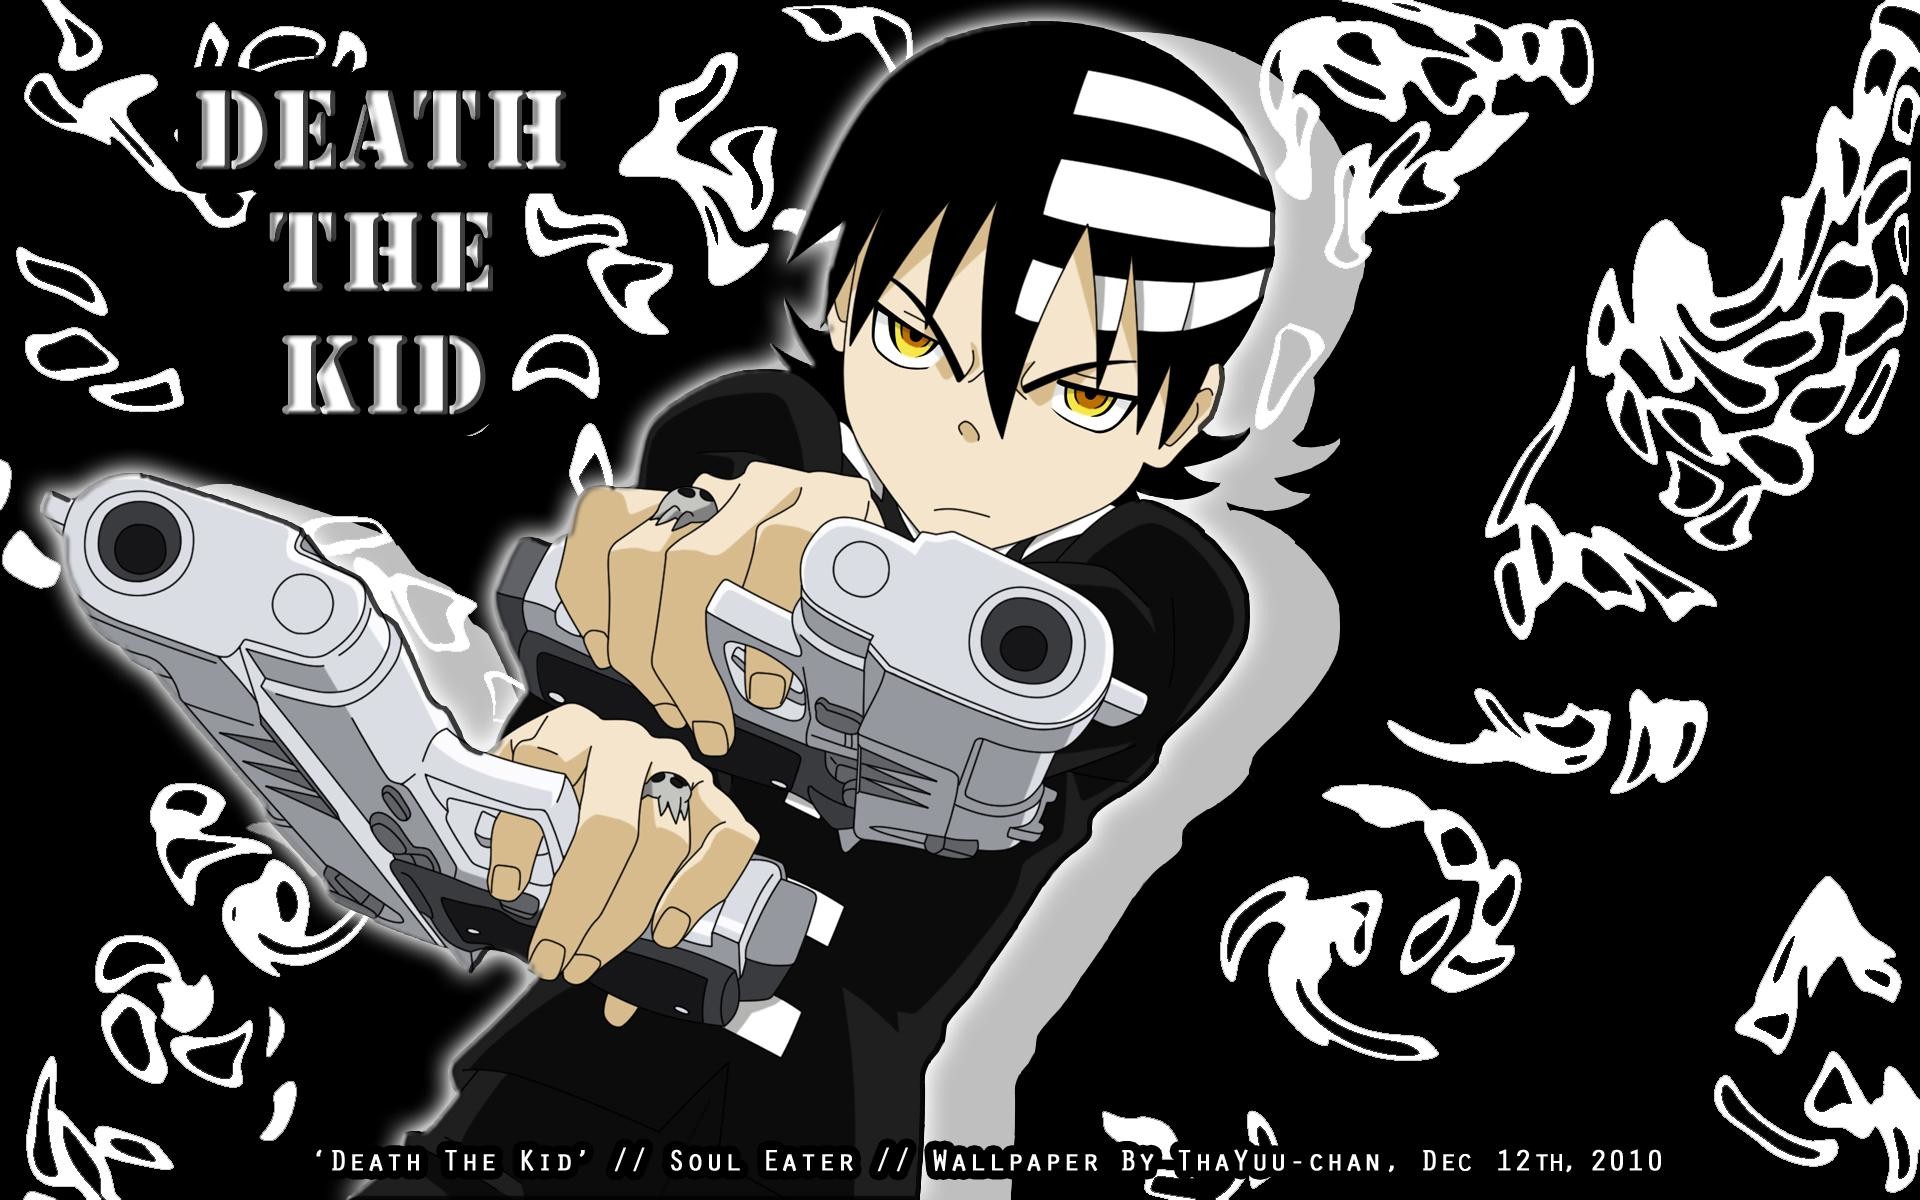 1920x1200 Soul Eater images Death the Kid HD wallpaper and background photos